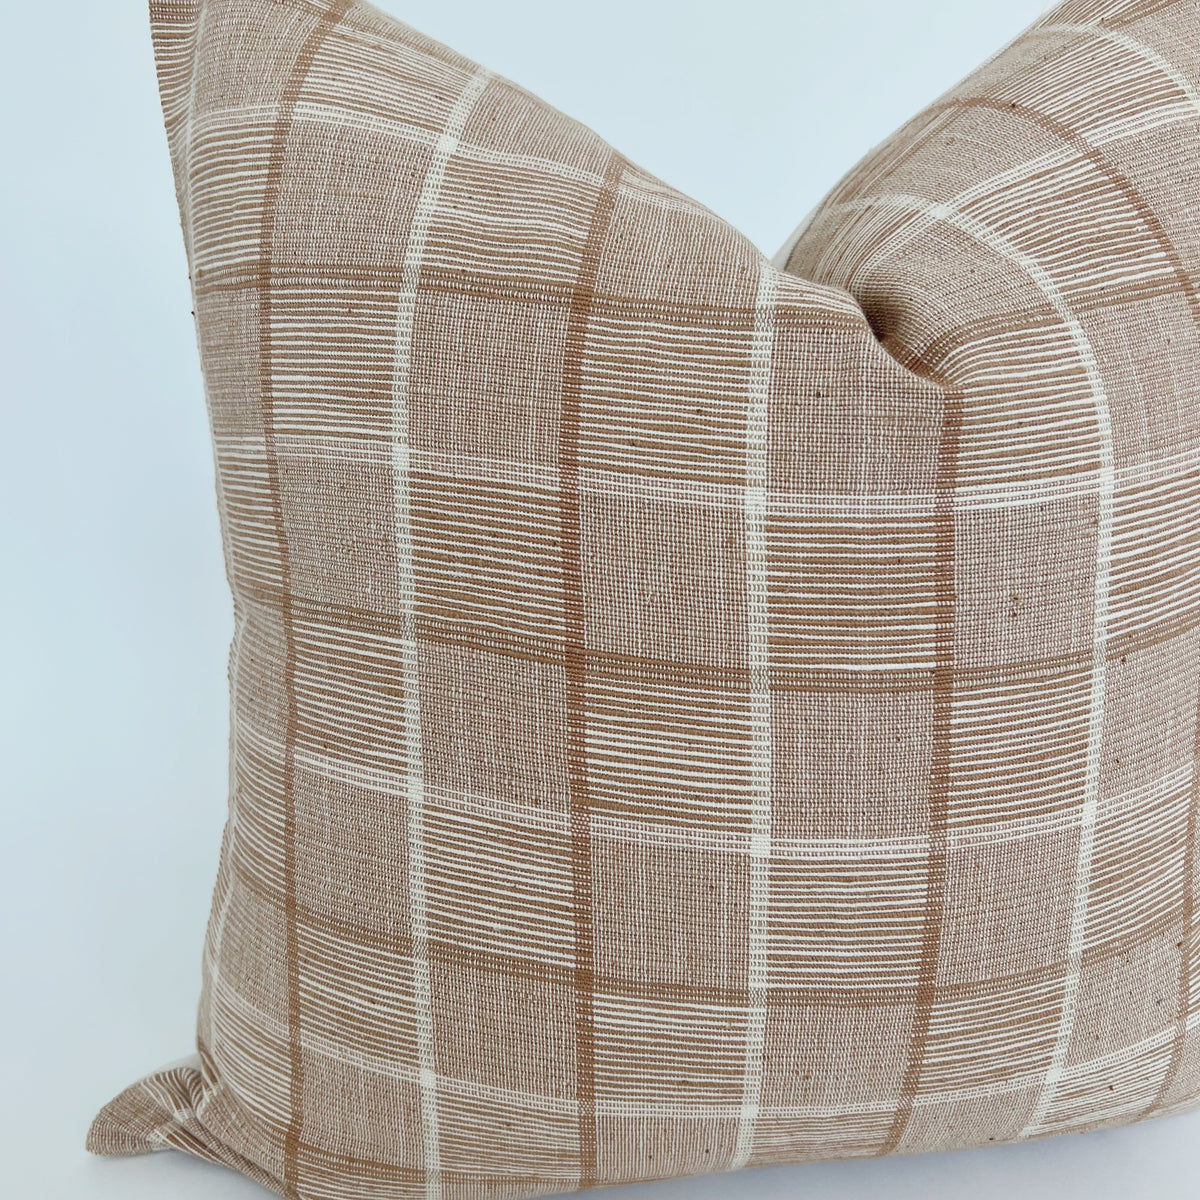 Rust and Cream Windowpane Pillow Cover close-up view